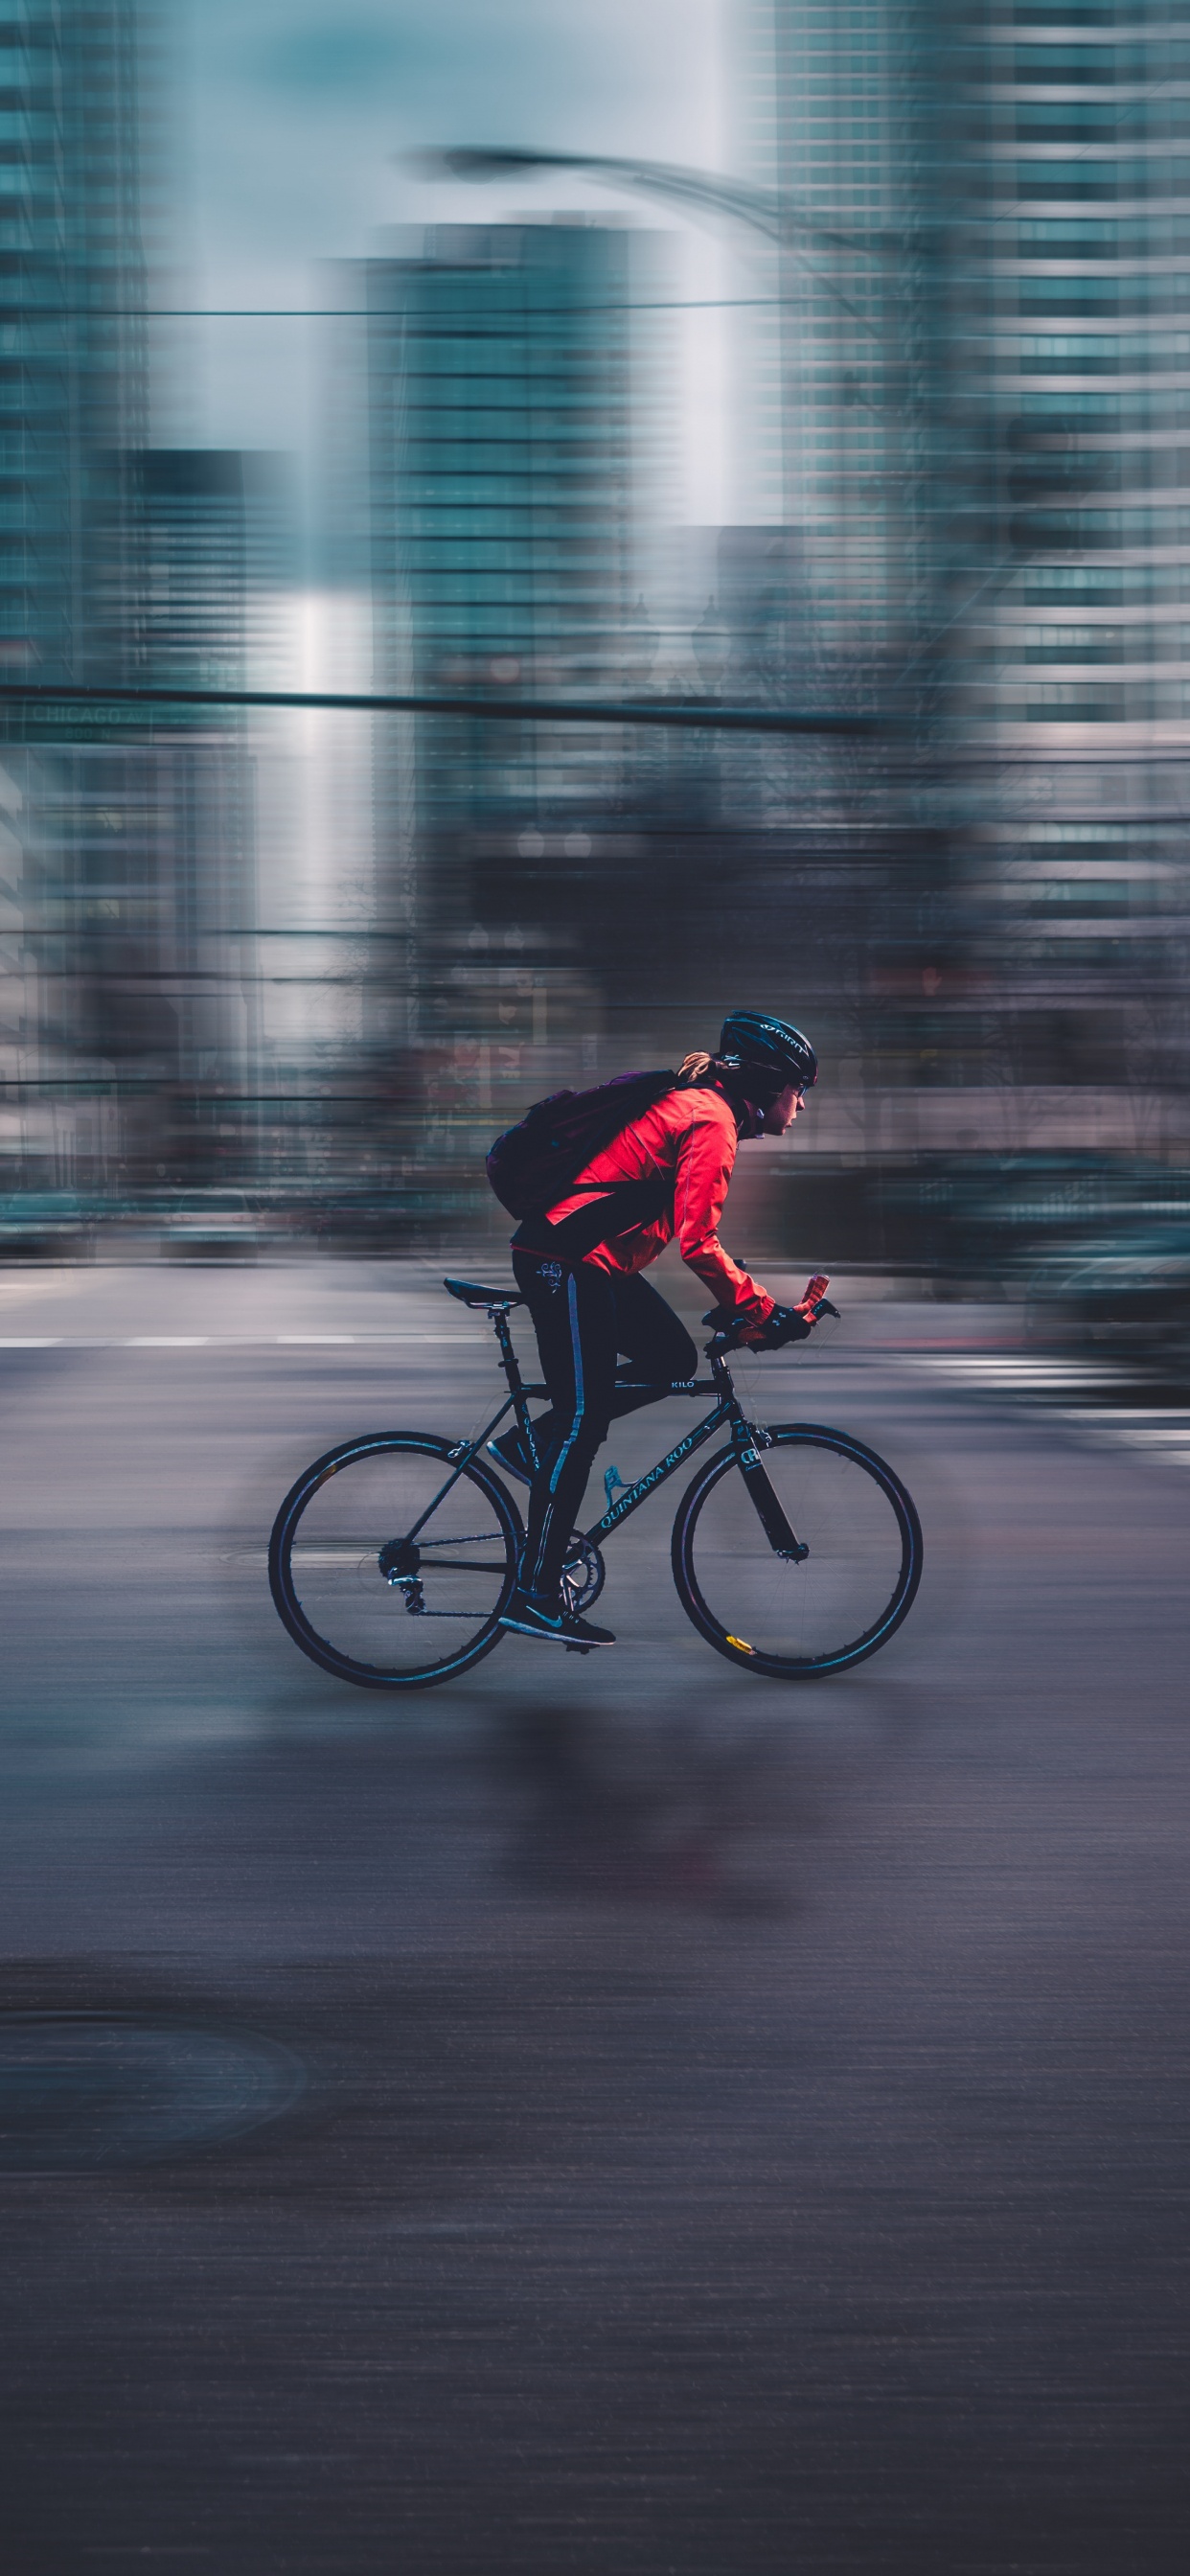 Man in Red Jacket Riding Bicycle on Road During Daytime. Wallpaper in 1242x2688 Resolution